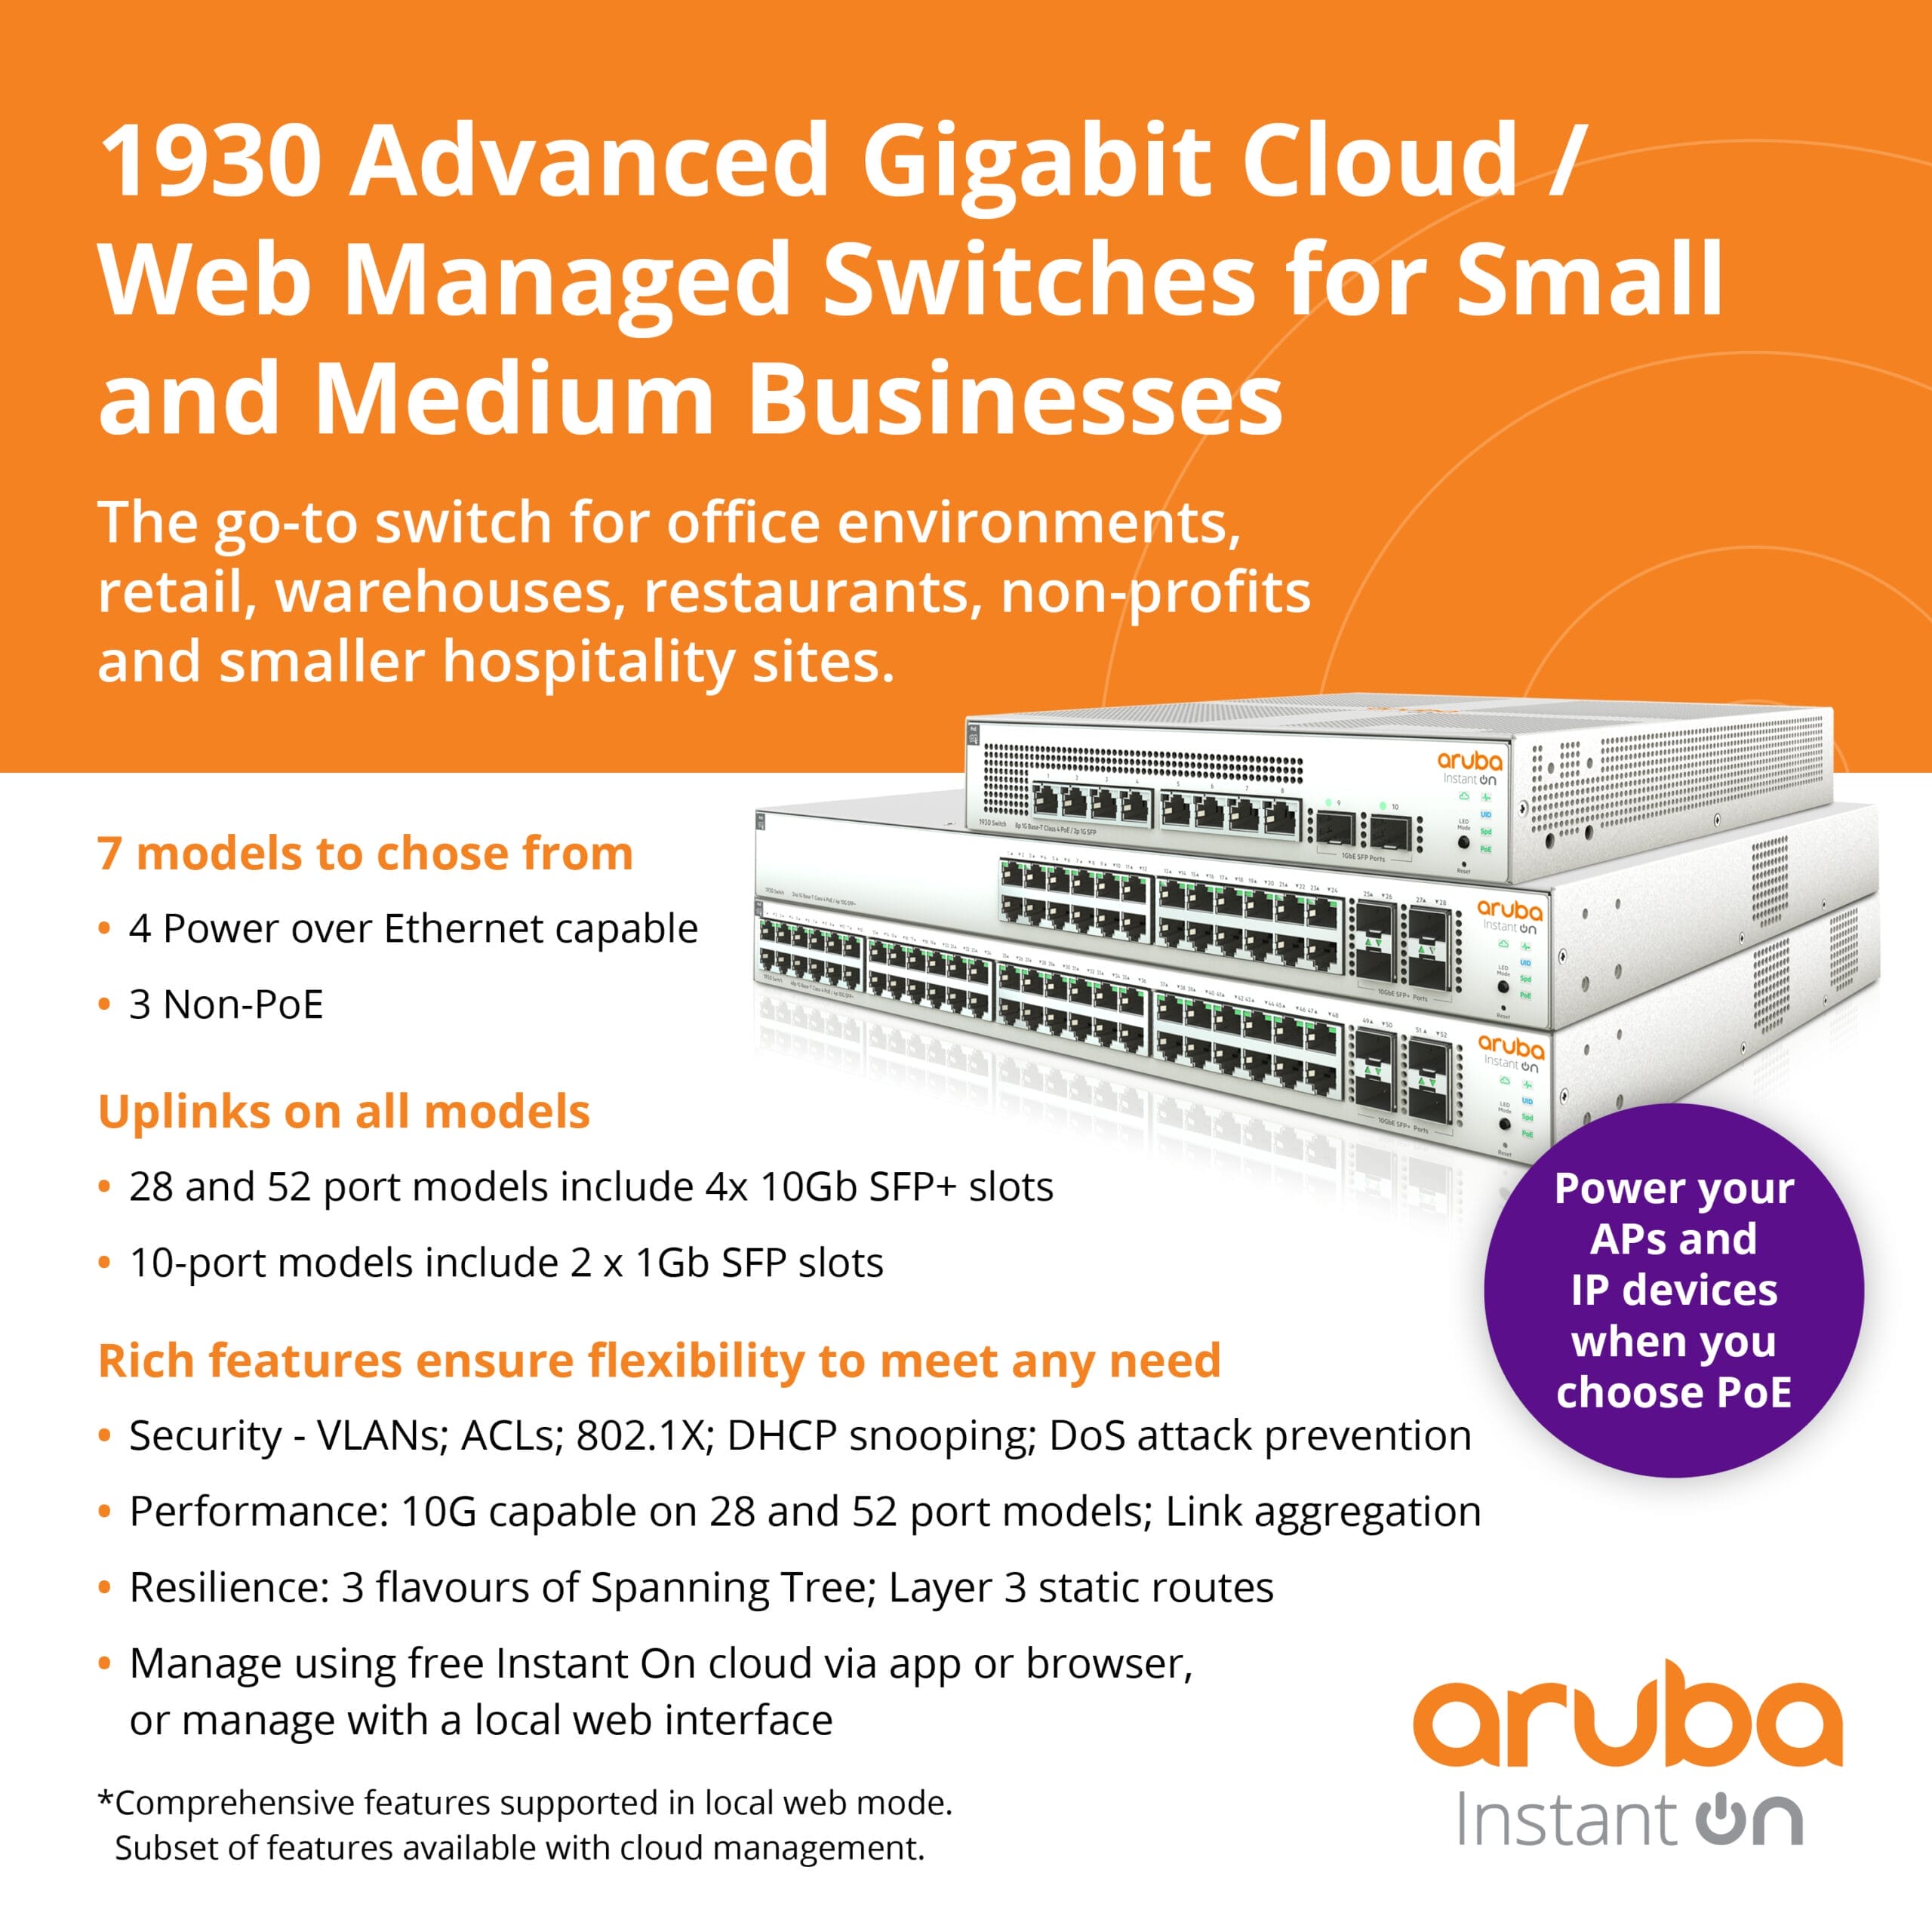 Aruba Instant On 1930 Switch Series At a Glance